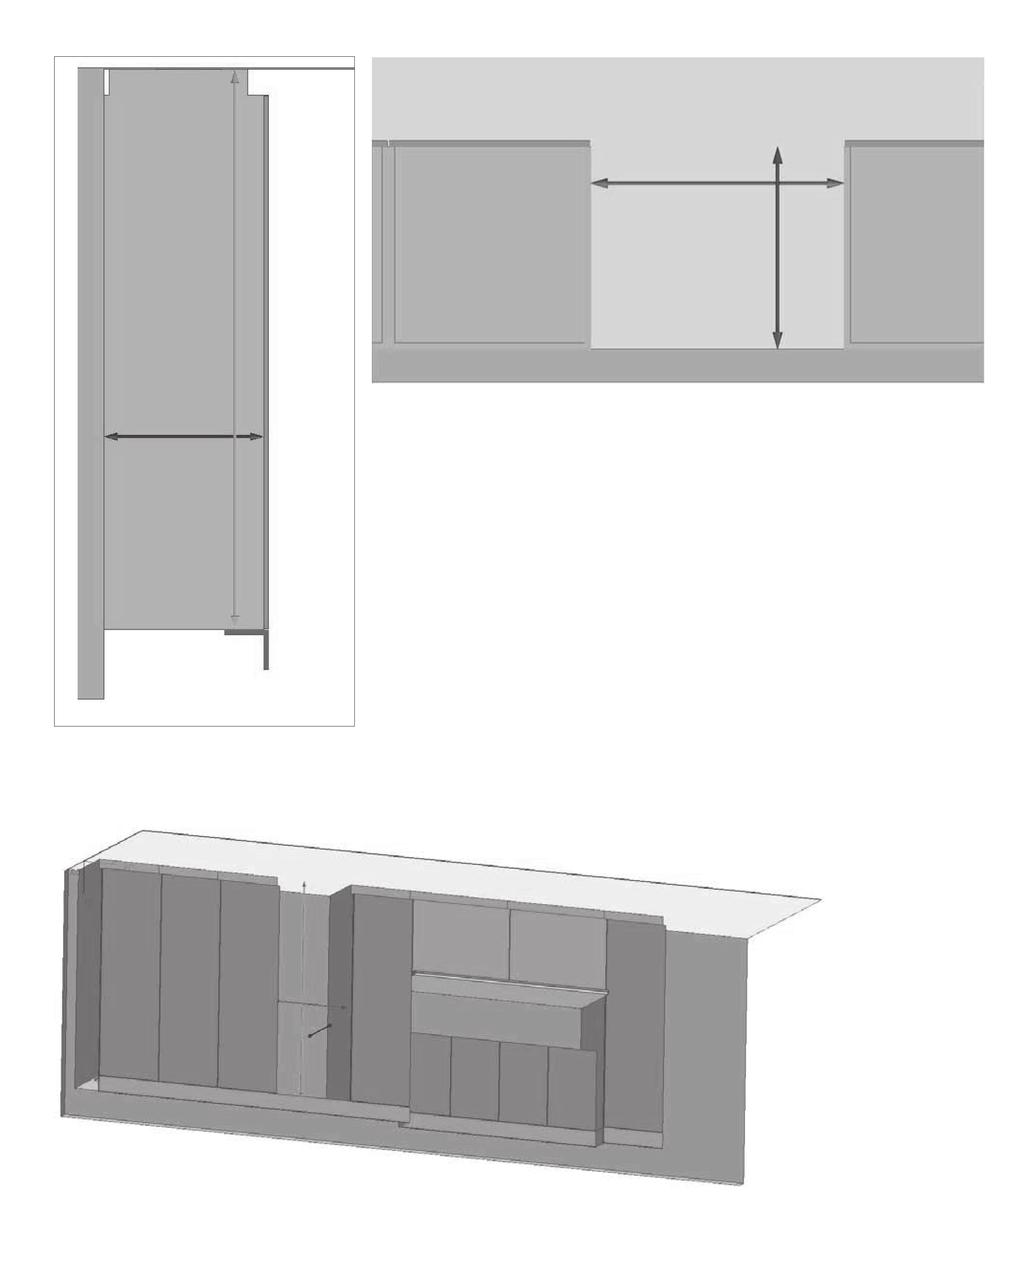 Planning Example #1 30 -Refrigerator in a kitchen with frameless cabinetry (3/4 front panel) Upper Valance room wall room floor Kitchen cabinet Kitchen cabinetry door panel Installation cavity Toe